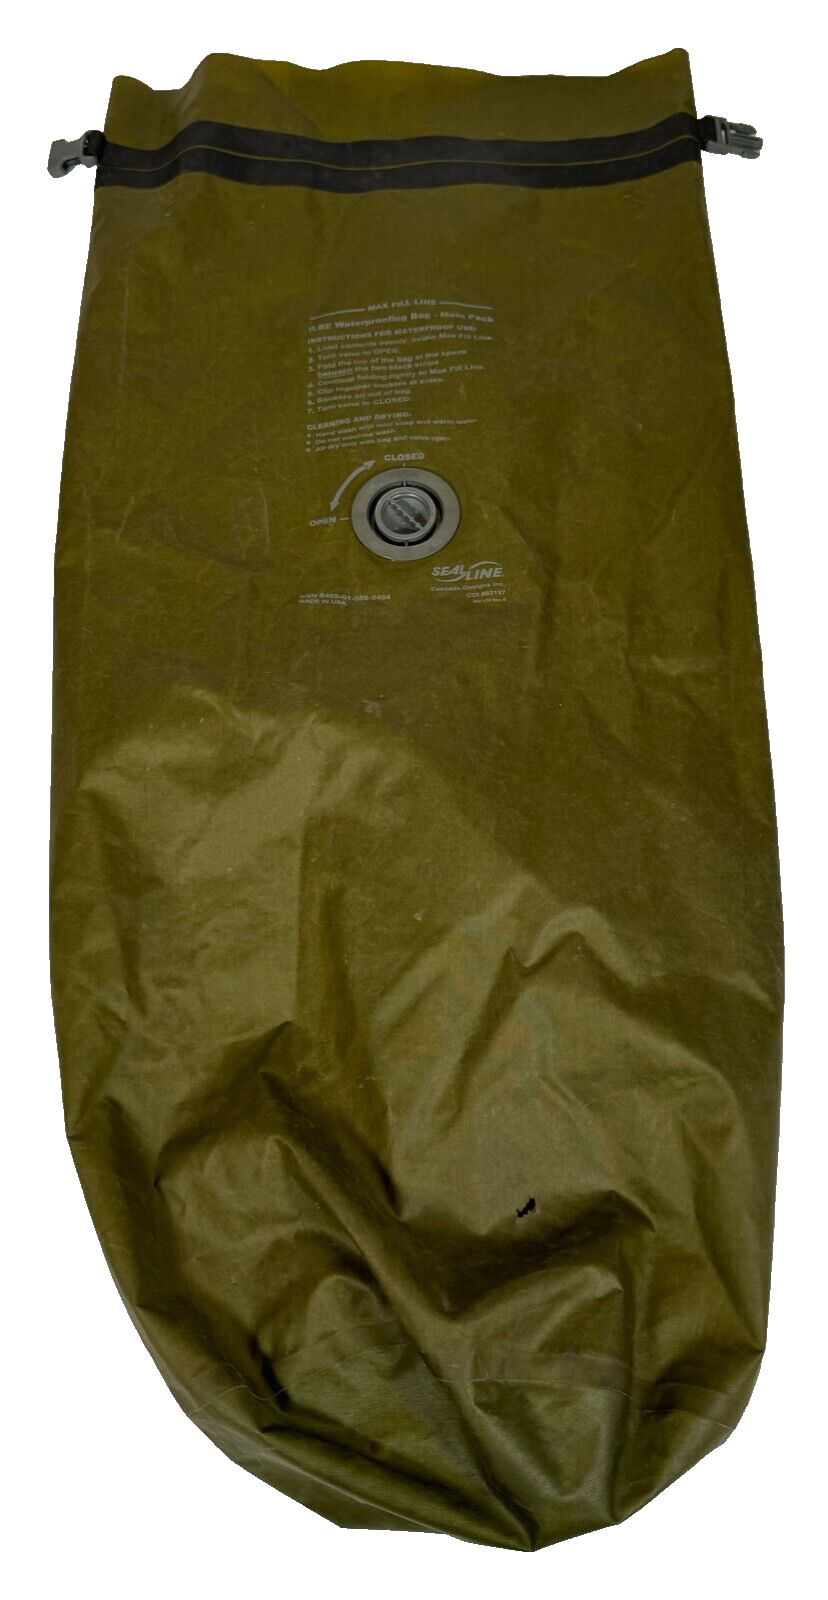 USMC Seal Line ILBE Waterproofing 65L Dry Bag for Main Pack OD Green